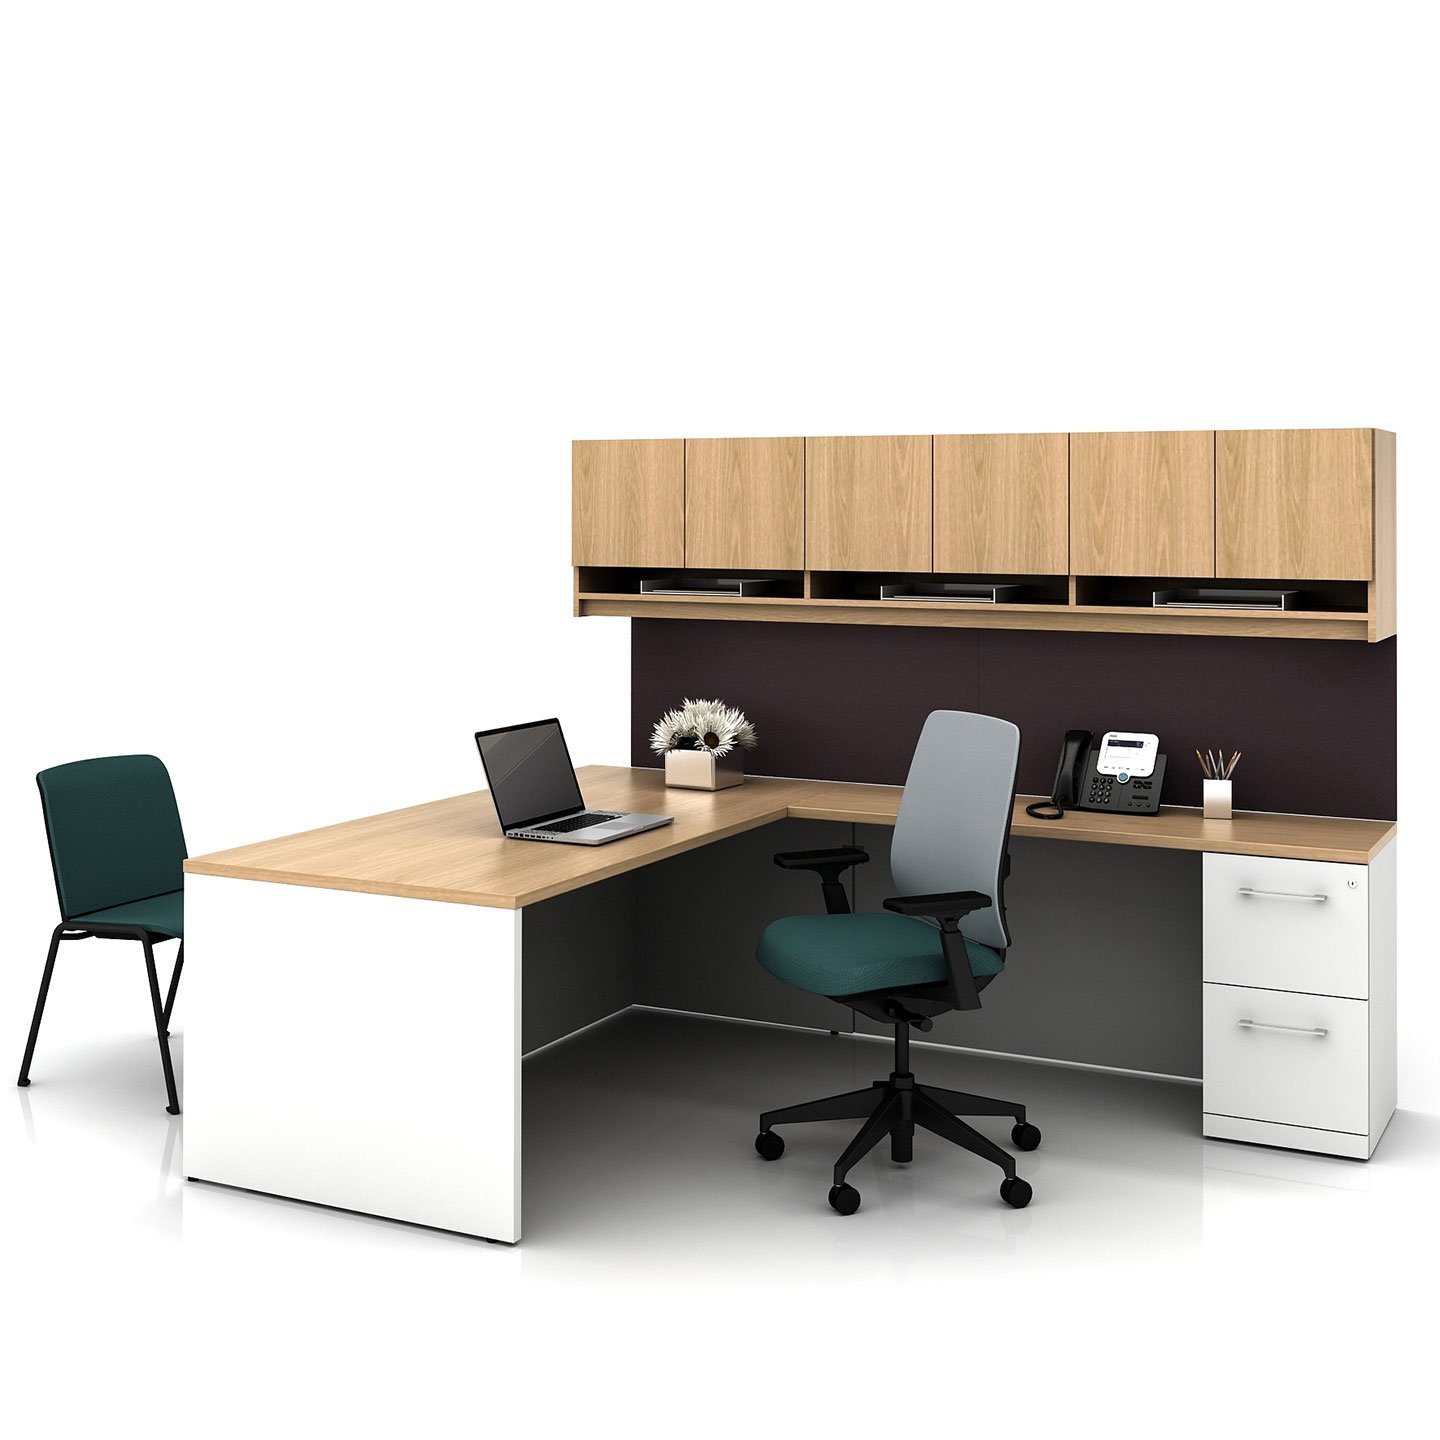 Haworth Masters Series Workspace in maple wood in L shape and storage shelves above desks with chairs for office space